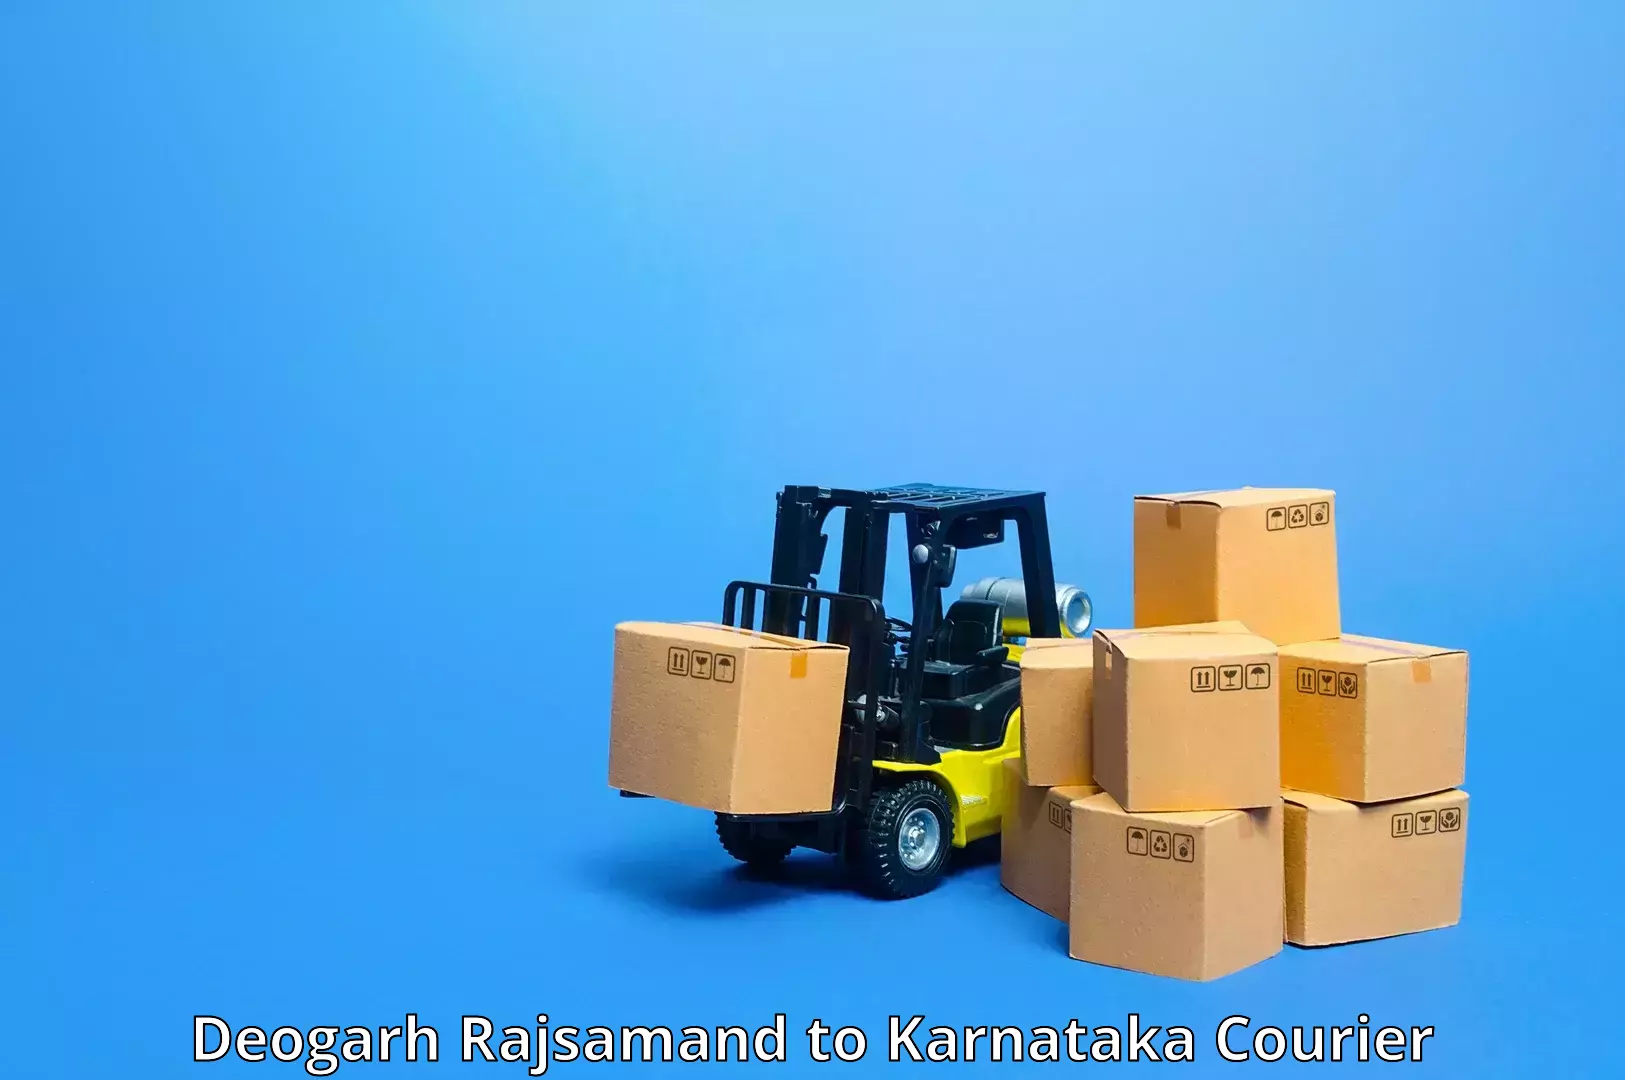 Express delivery capabilities in Deogarh Rajsamand to Chikmagalur